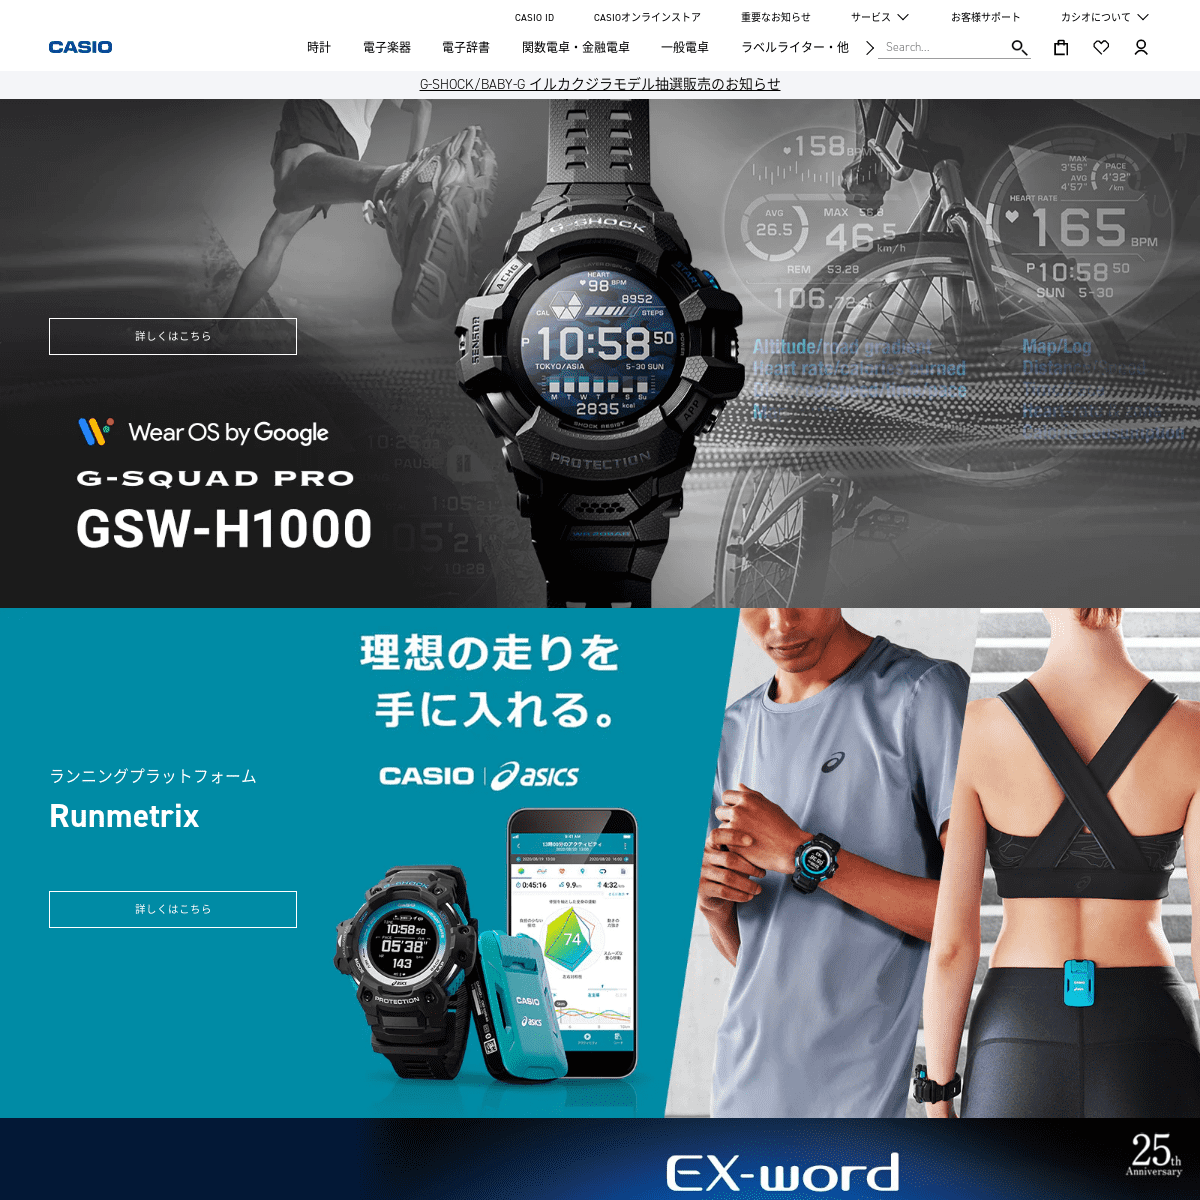 A complete backup of https://casio.jp